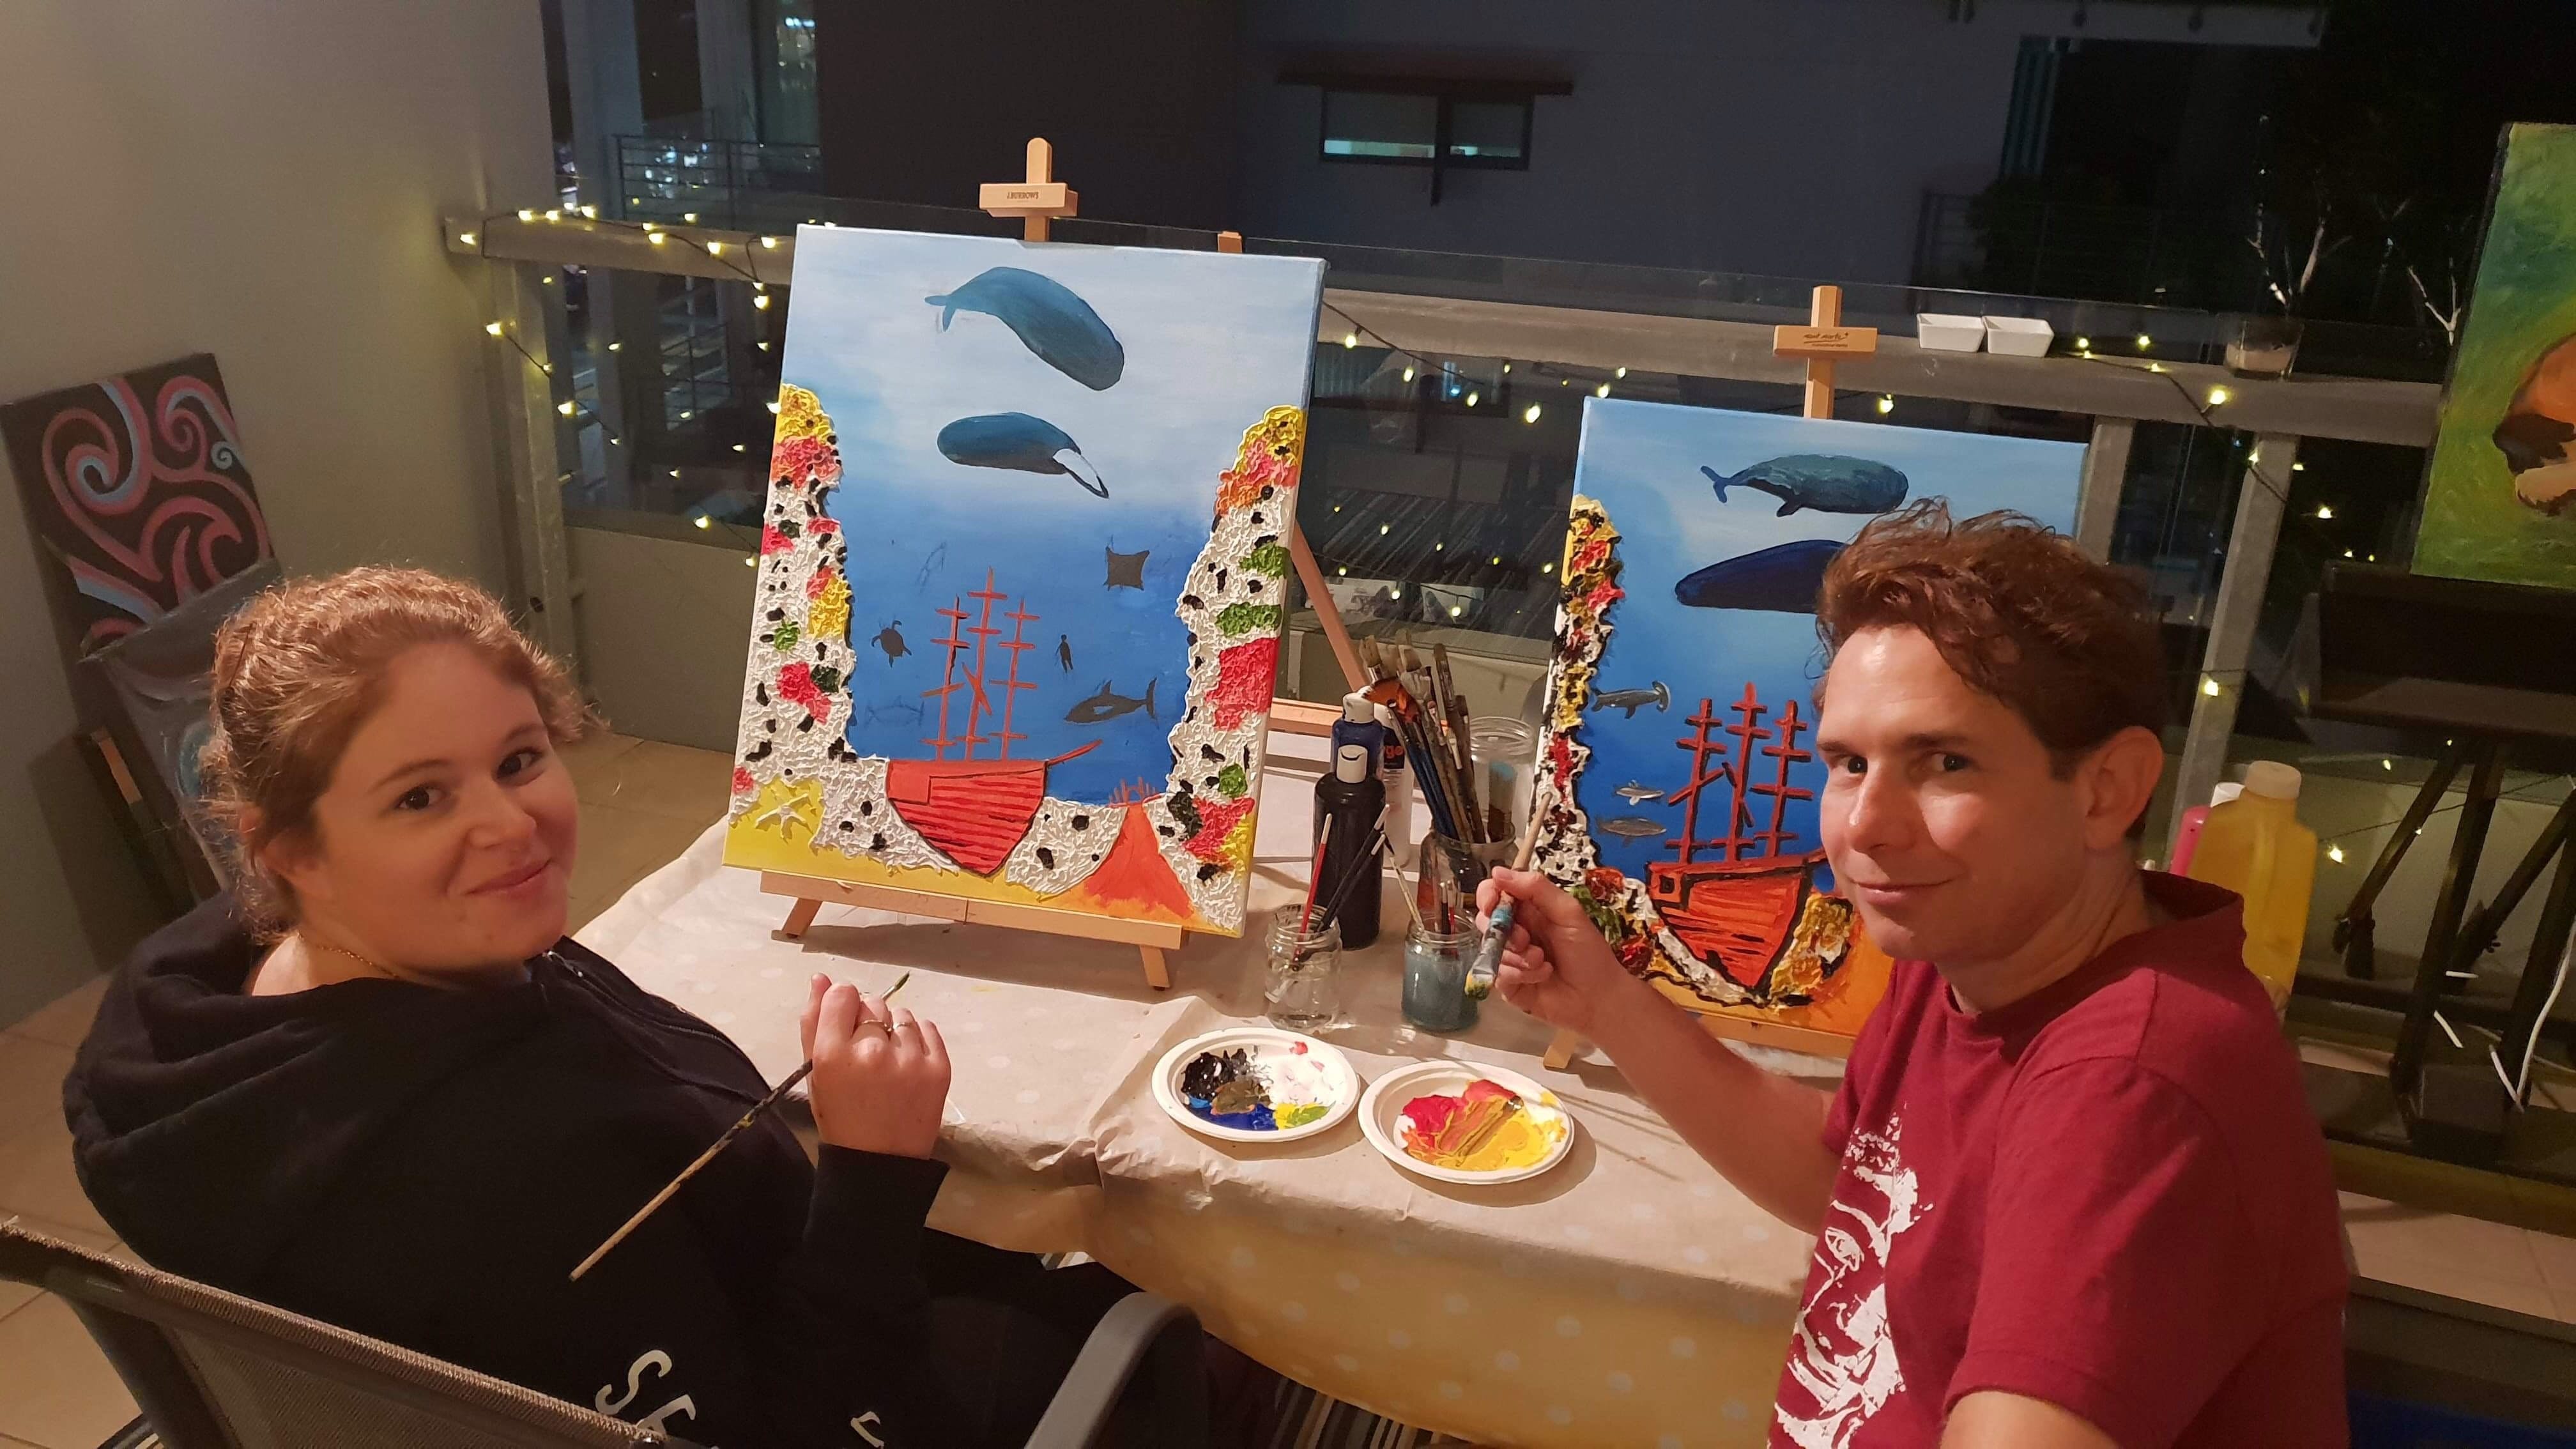 Paint and Sip Social Art Classes 2 for 1 - Accommodation Kalgoorlie